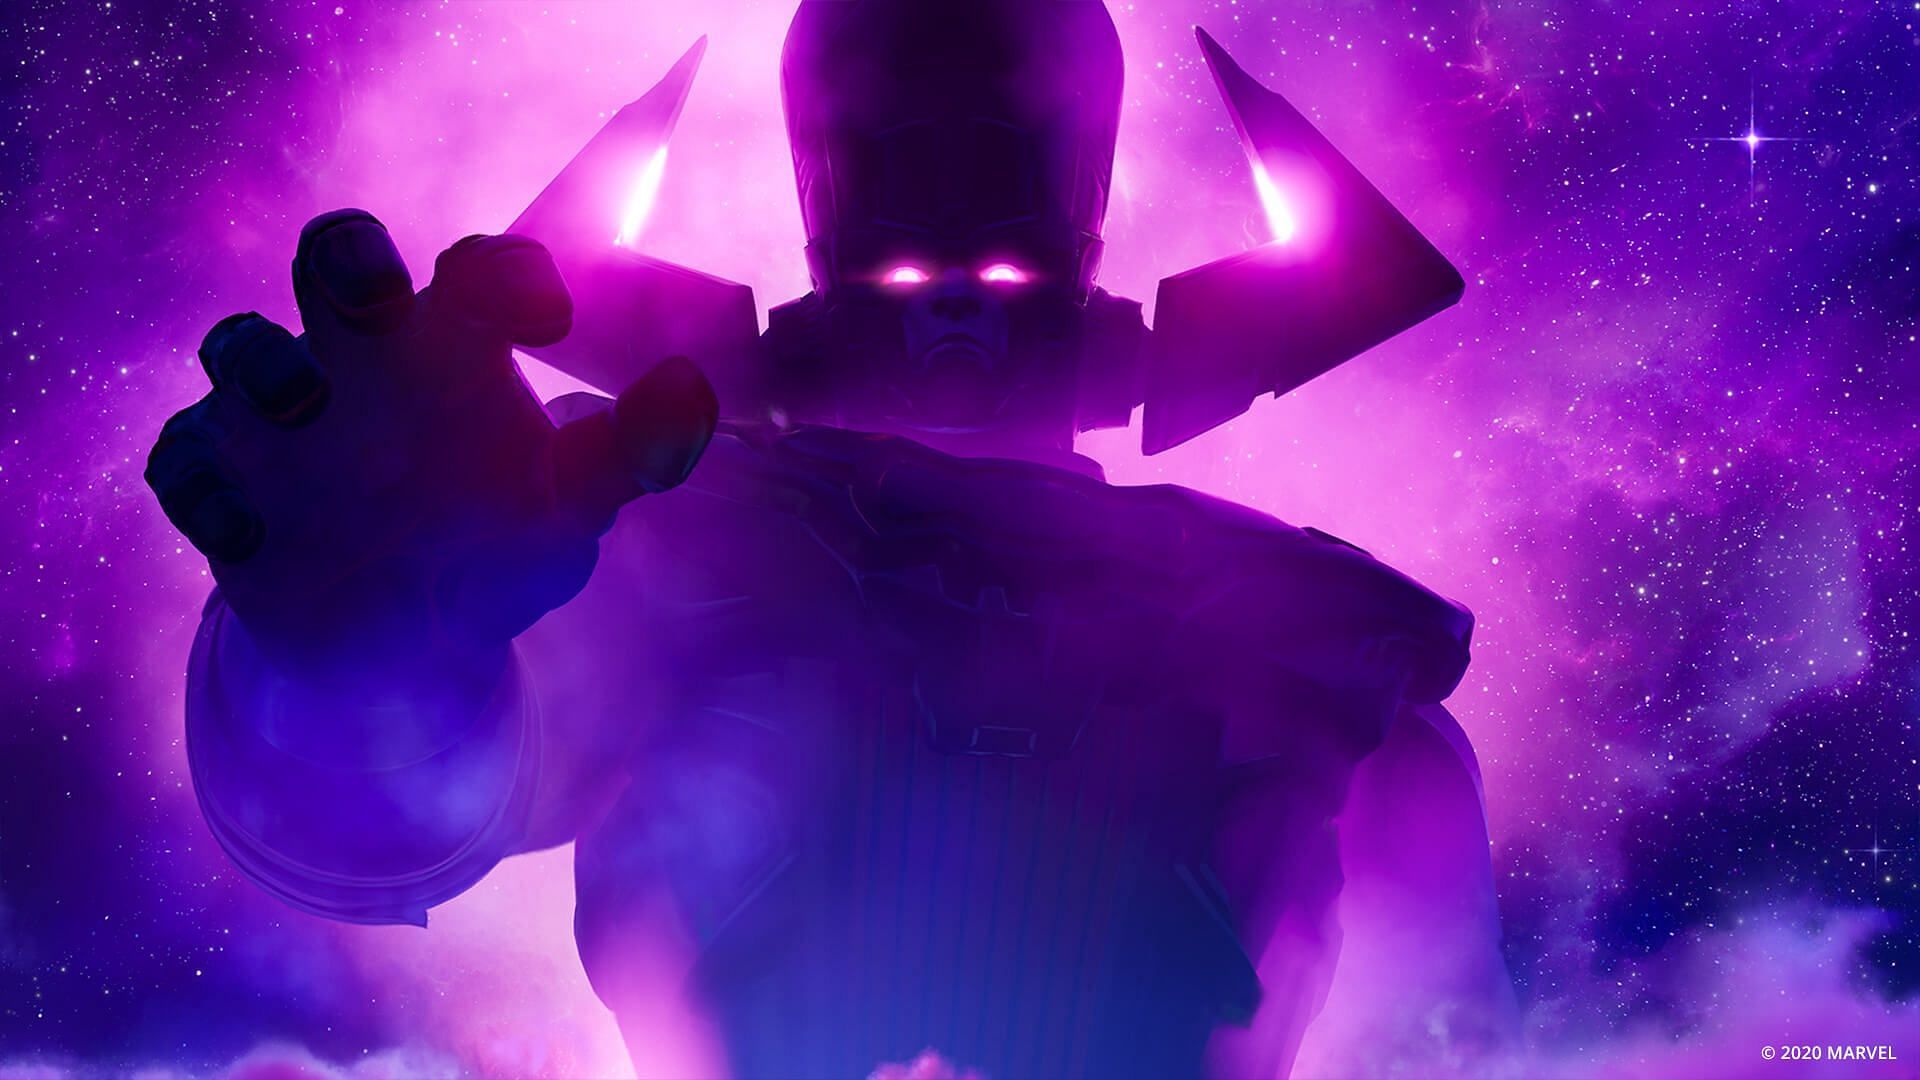 Galactus as he appears in the comics (Image via Marvel)